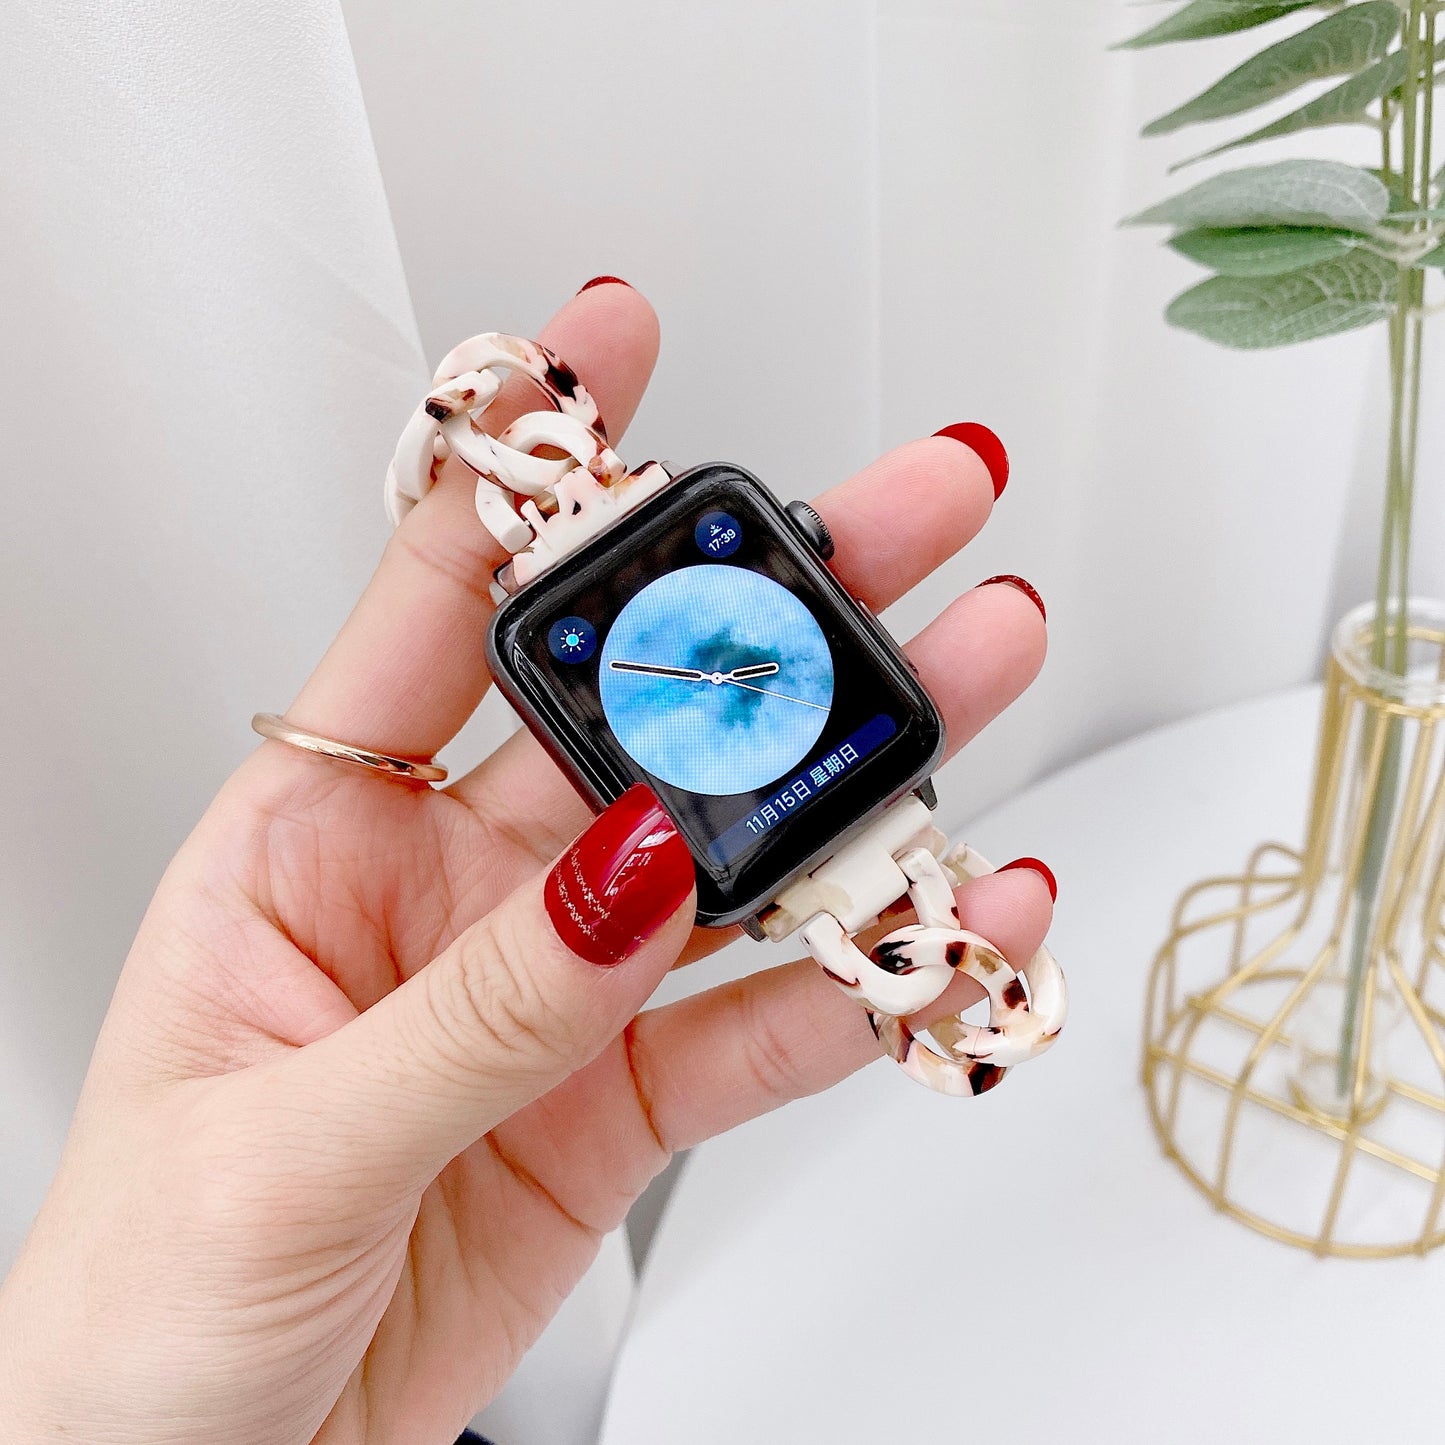 Transparent Resin Straps for apple watch band - Wristwatchstraps.co